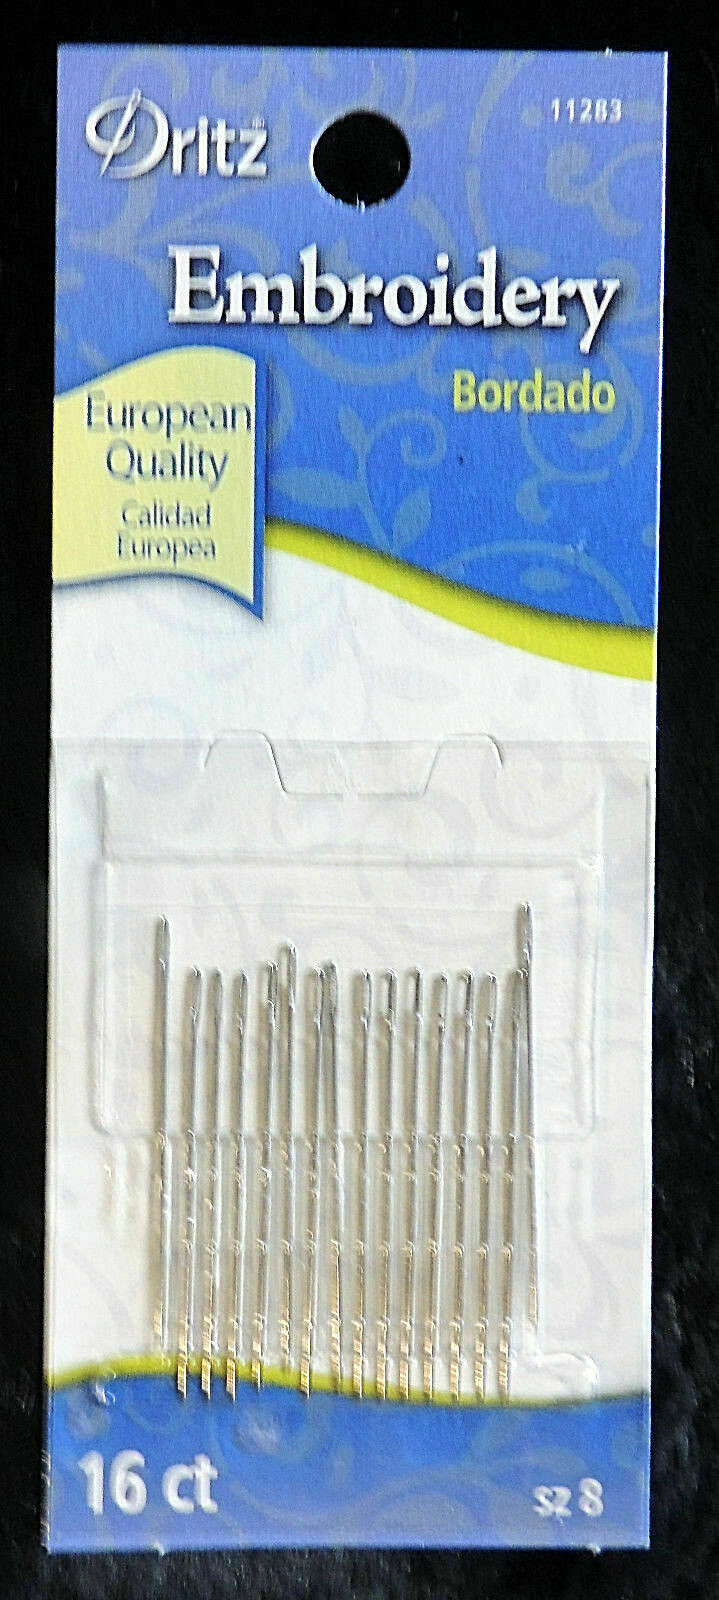 Embroidery Hand Needles sz8 - All About Fabrics